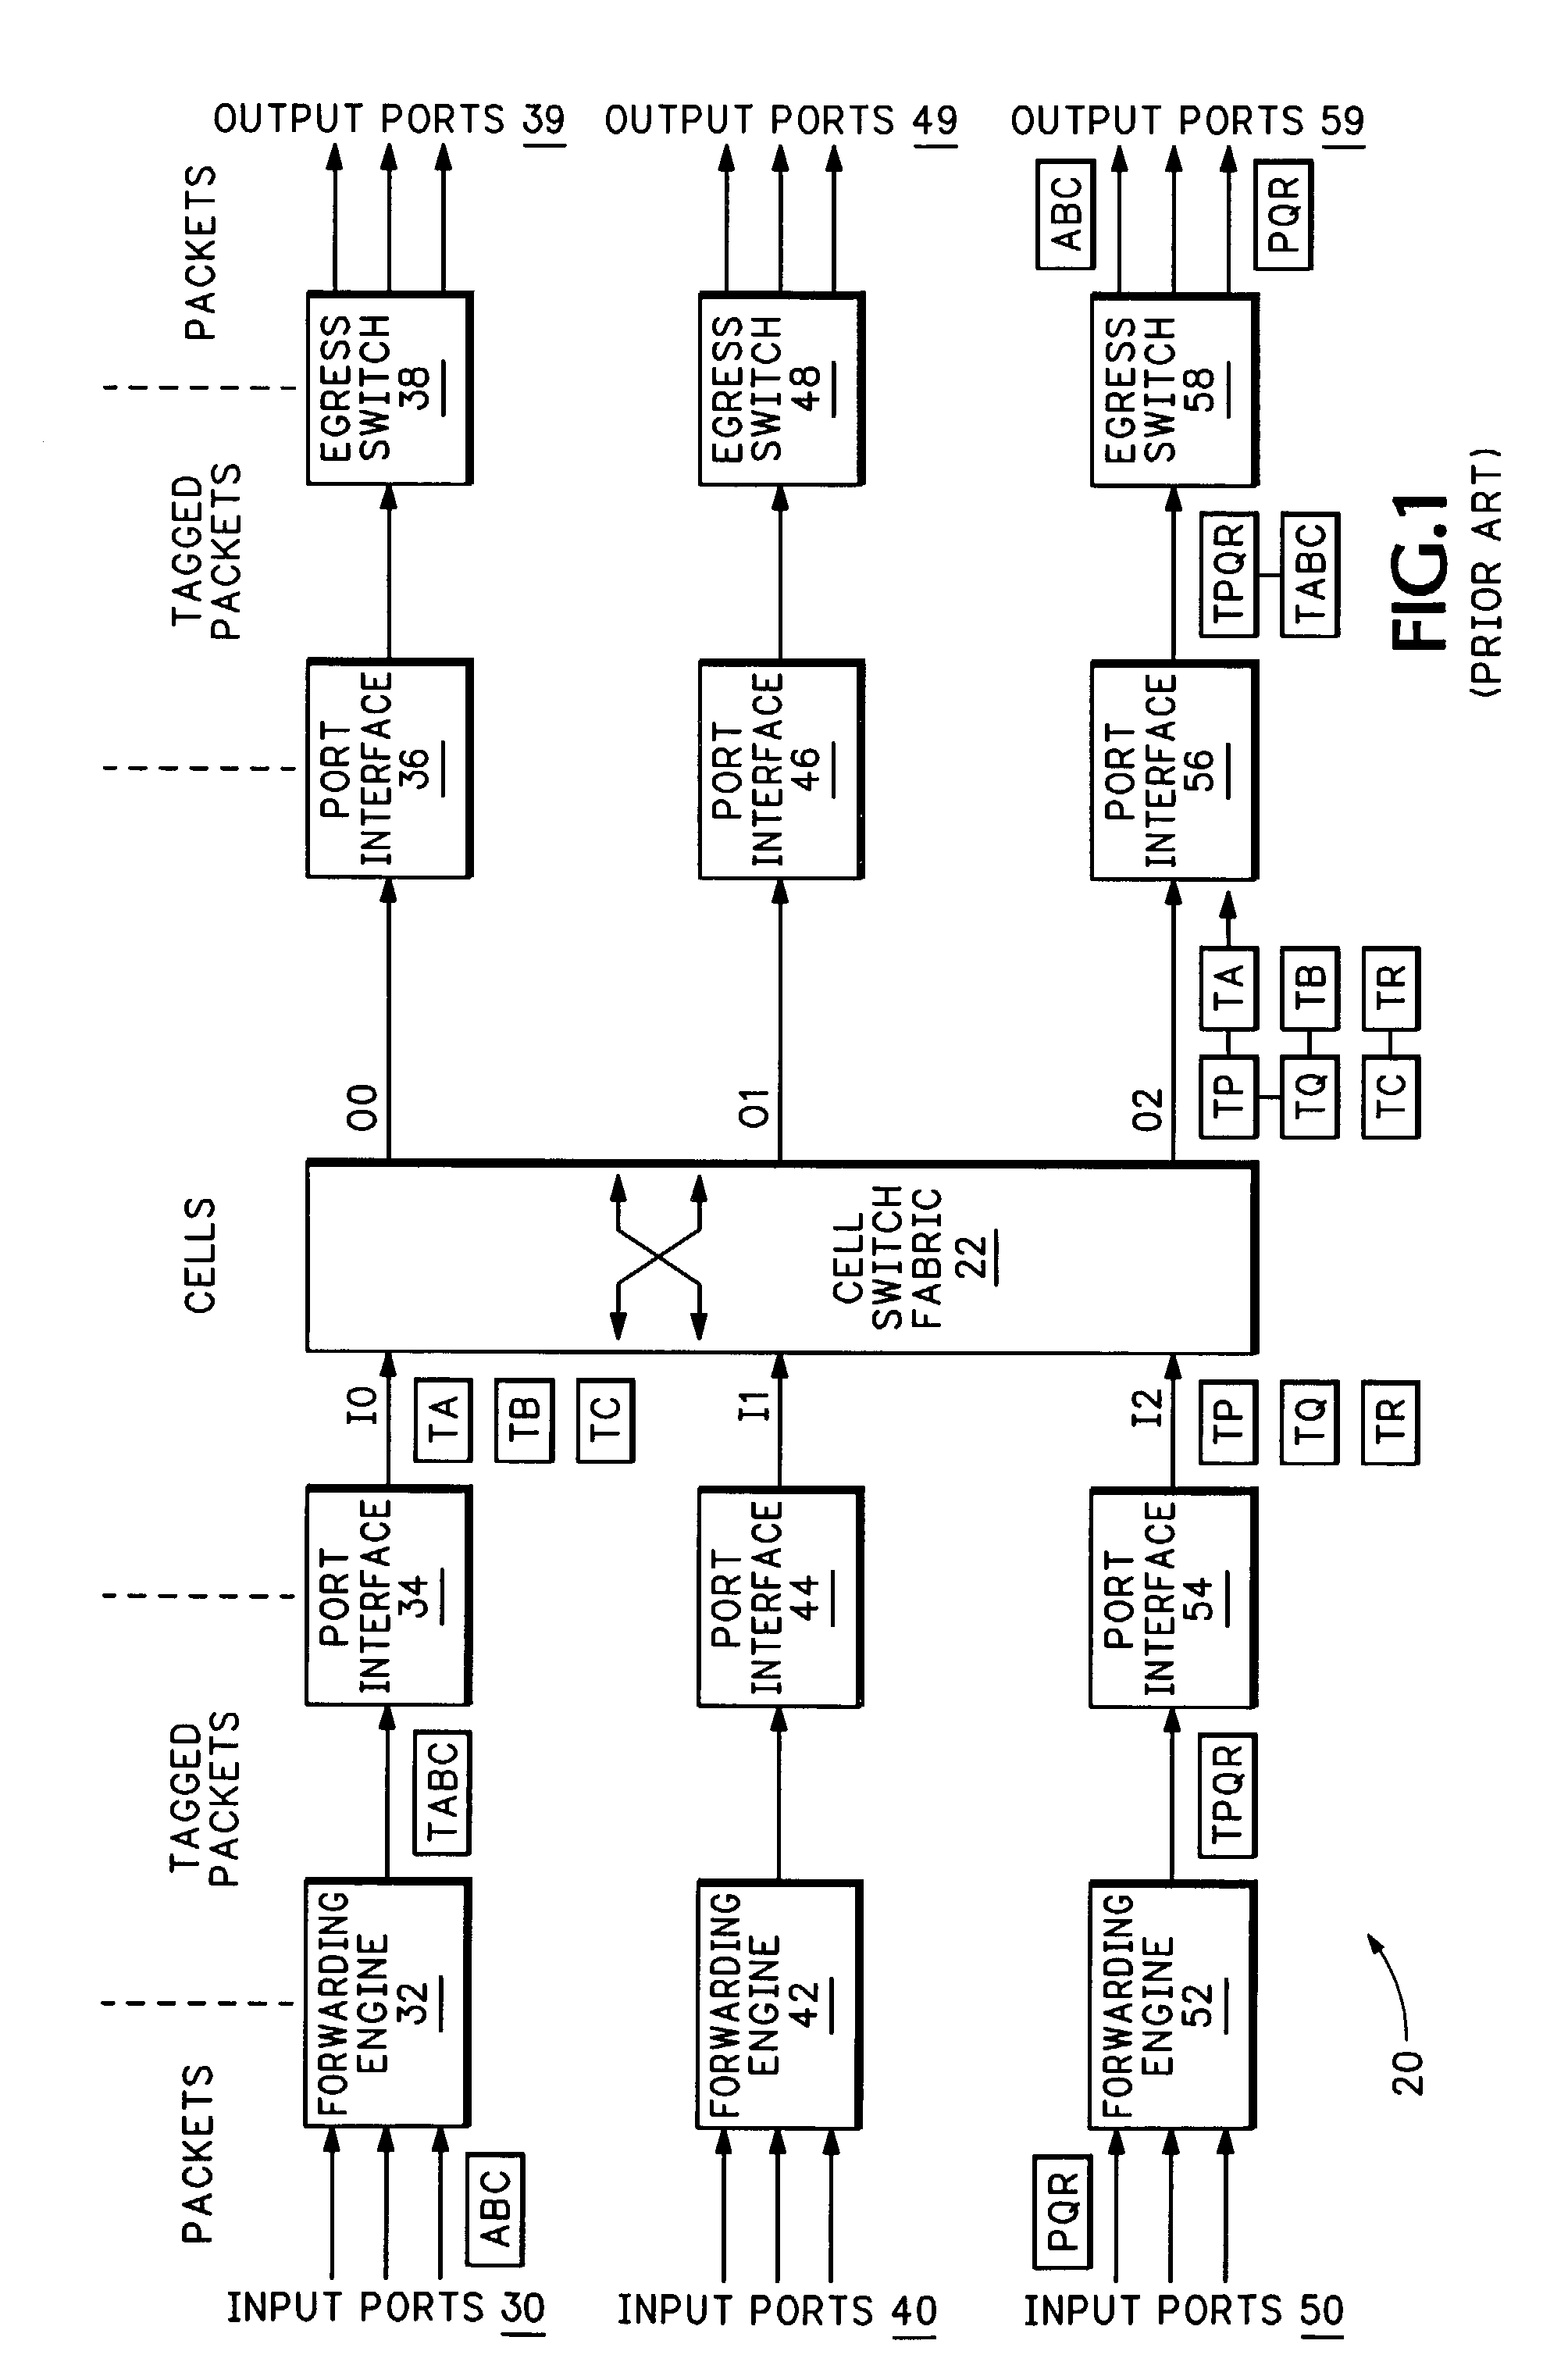 High-speed router switching architecture